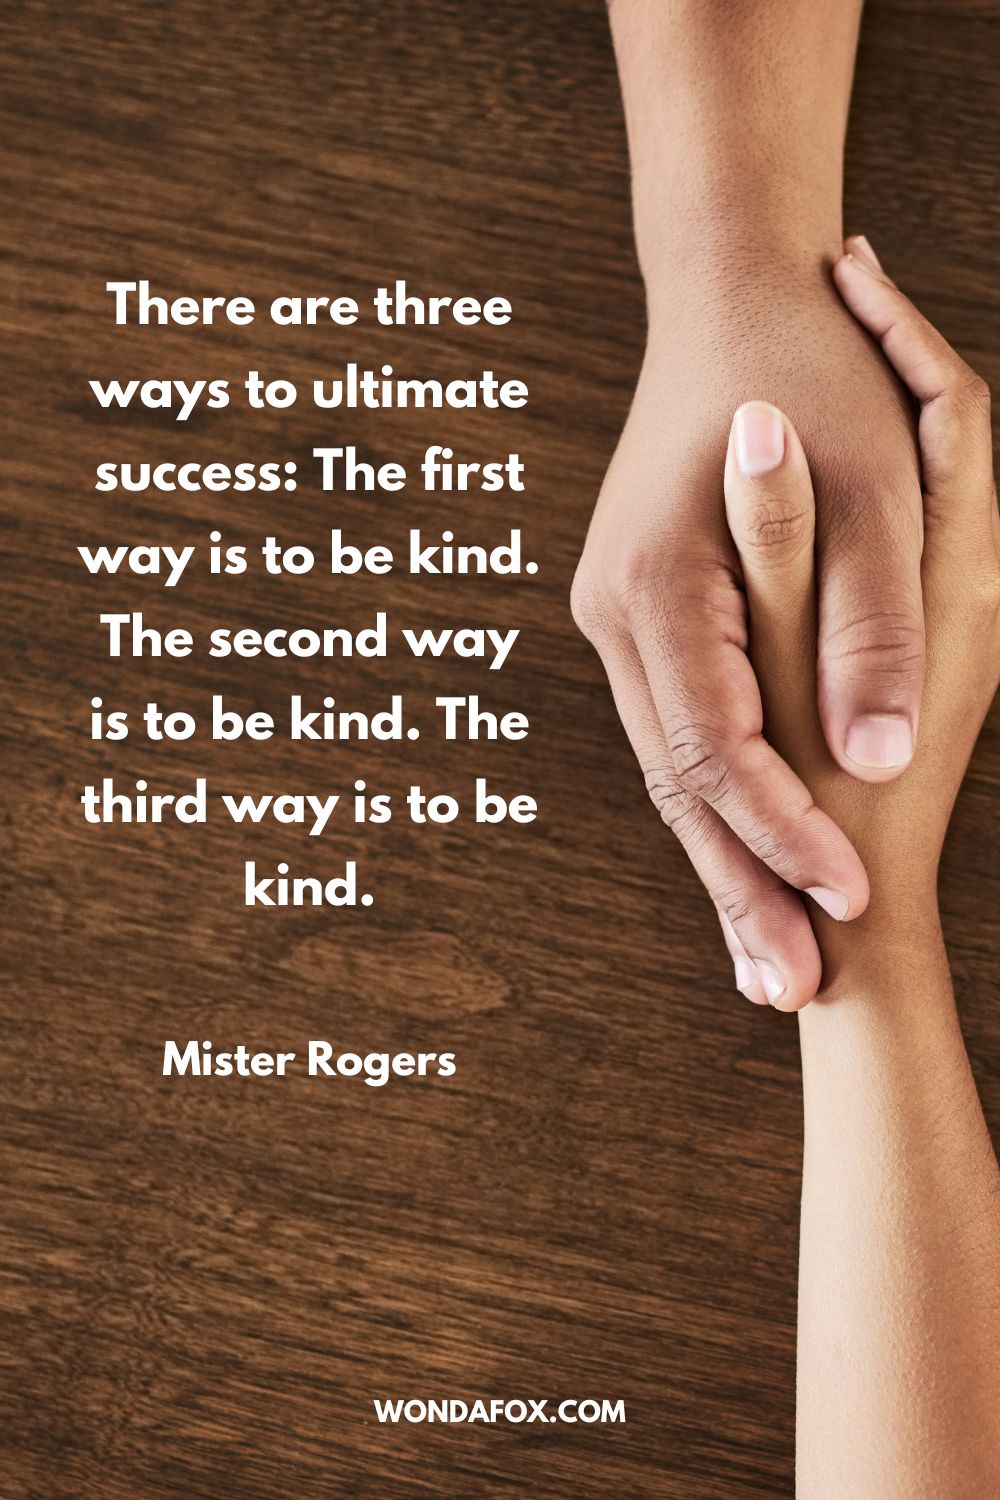 There are three ways to ultimate success: The first way is to be kind. The second way is to be kind. The third way is to be kind. Mister Rogers